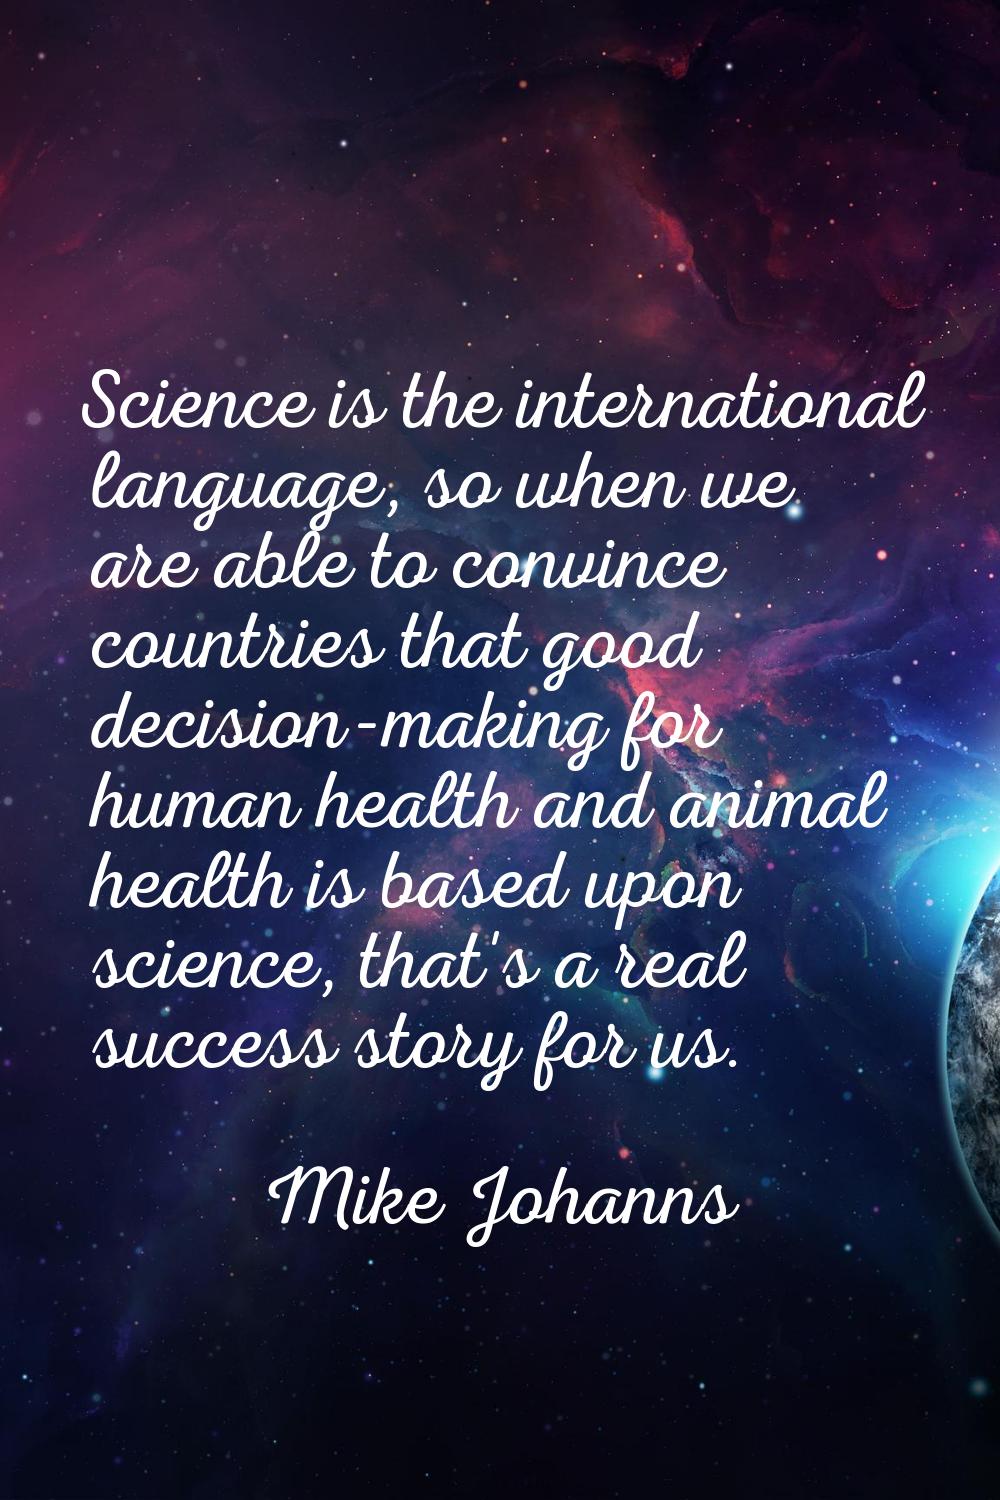 Science is the international language, so when we are able to convince countries that good decision